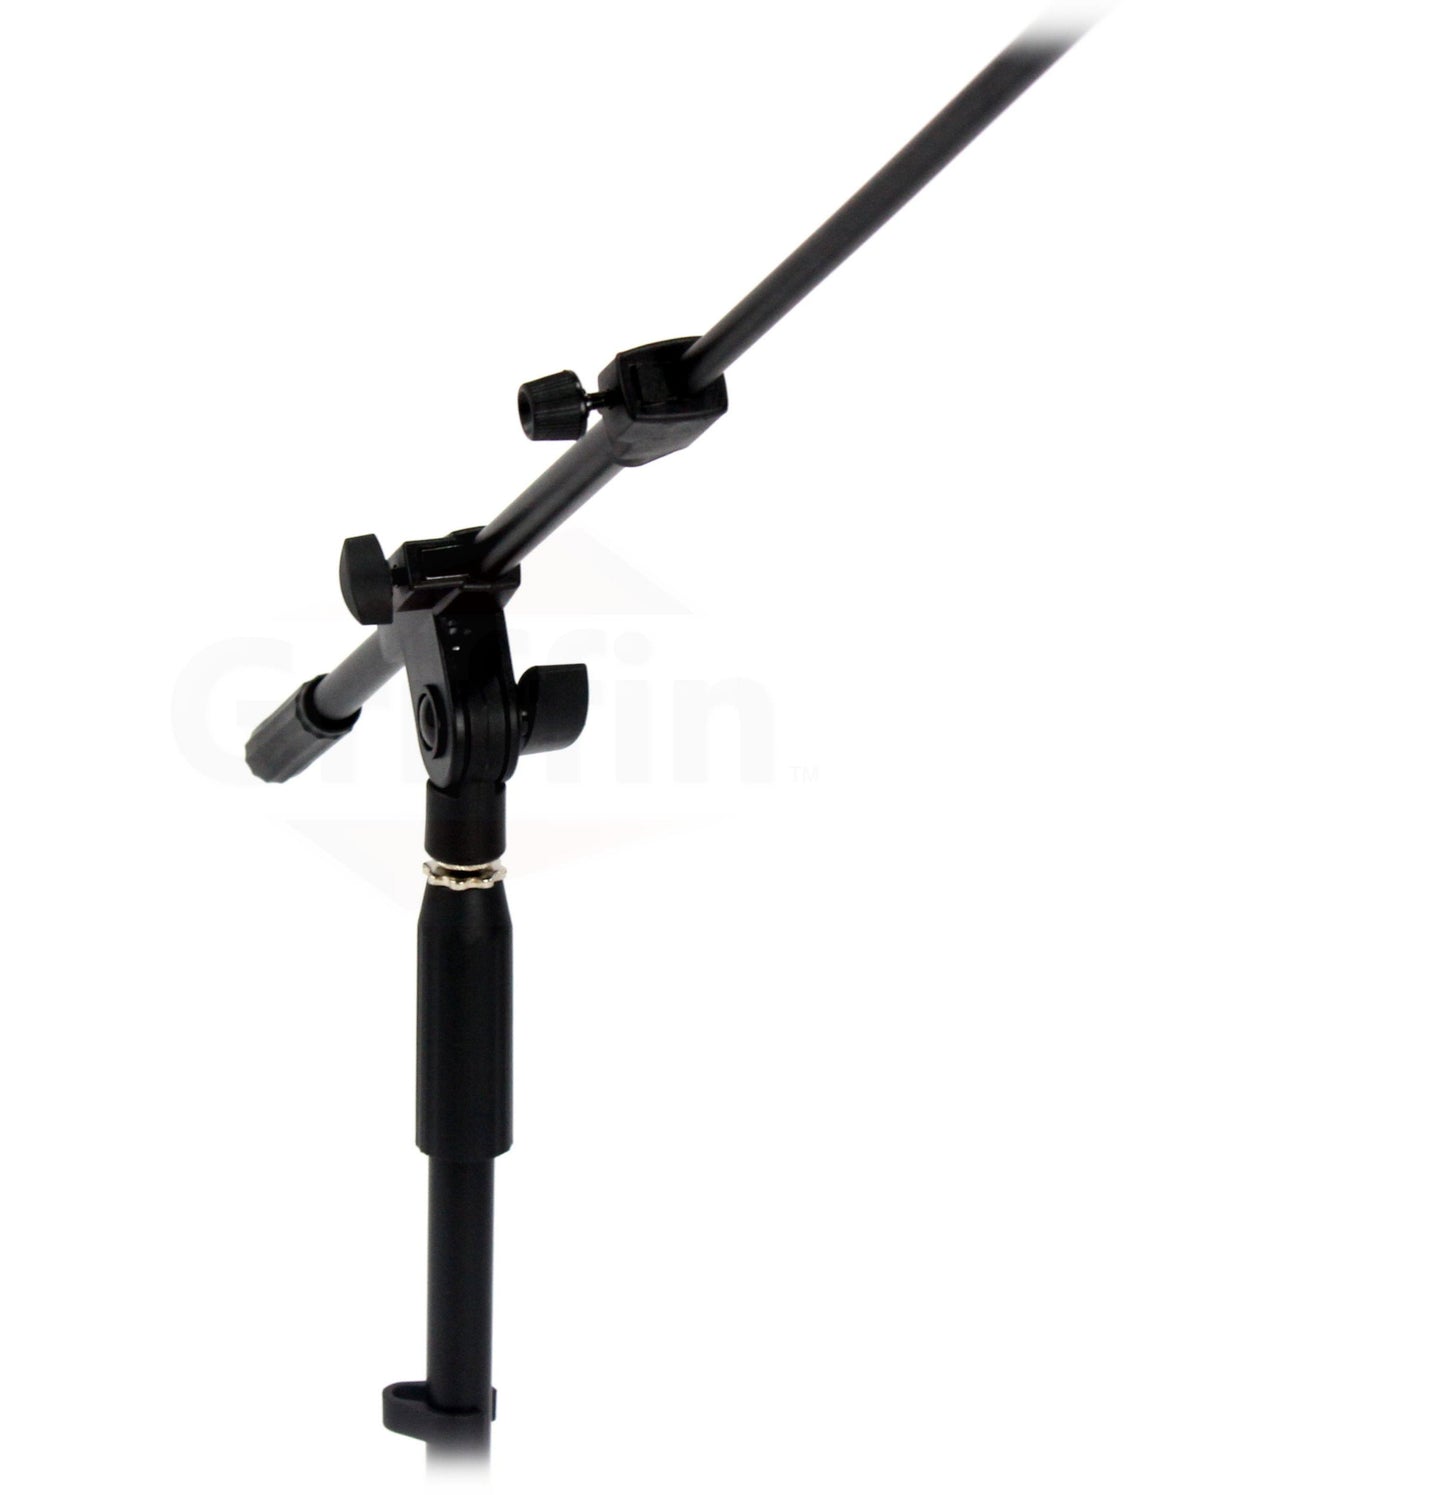 Short Microphone Stand with Boom Arm by GRIFFIN - Low Profile Tripod Mic Stand Mount for Kick Bass Drum, Studio Desktop Singing Recording, Guitar Amp